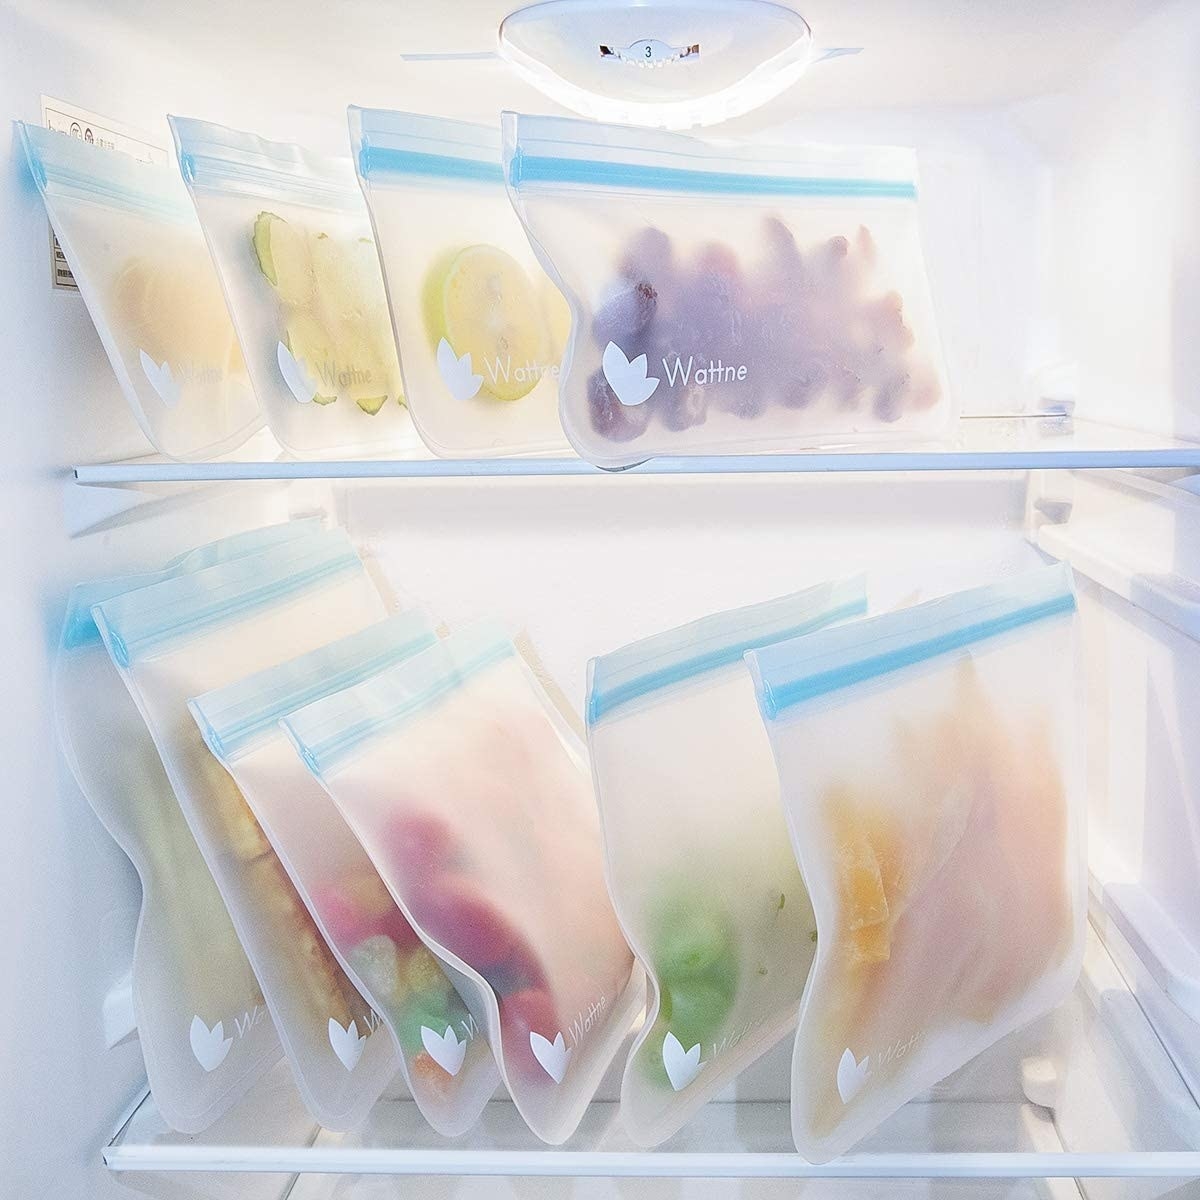 Reusable sandwich bags of various sizes in a fridge 